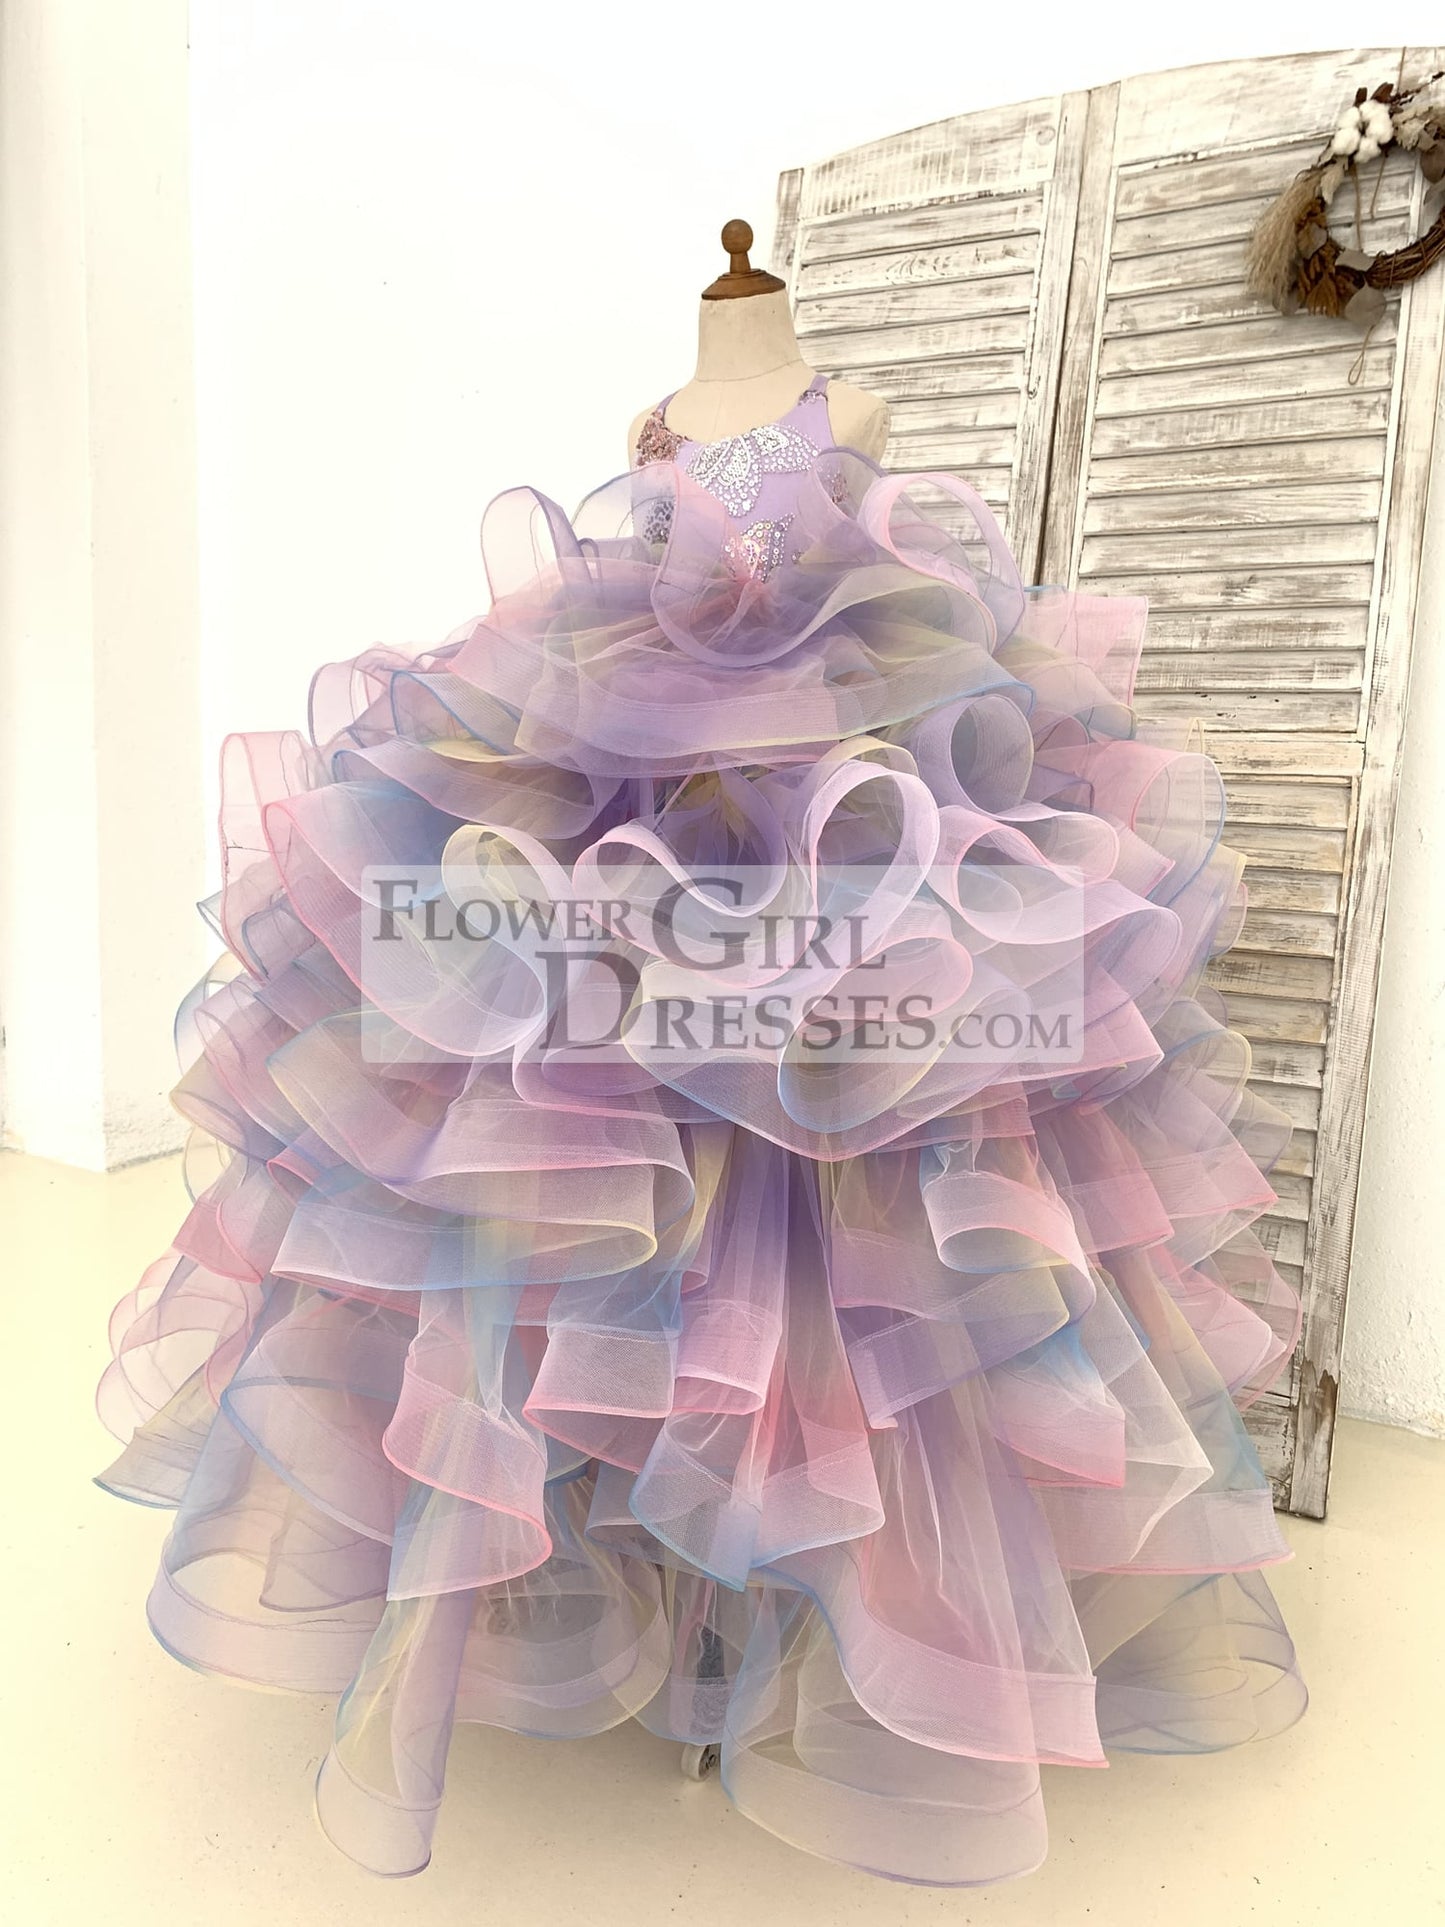 Rainbow Ruffle Tulle Butterfly Beaded Sequin Backless Wedding Flower Girl Dress Kids Birthday Party Ball Gown Dress